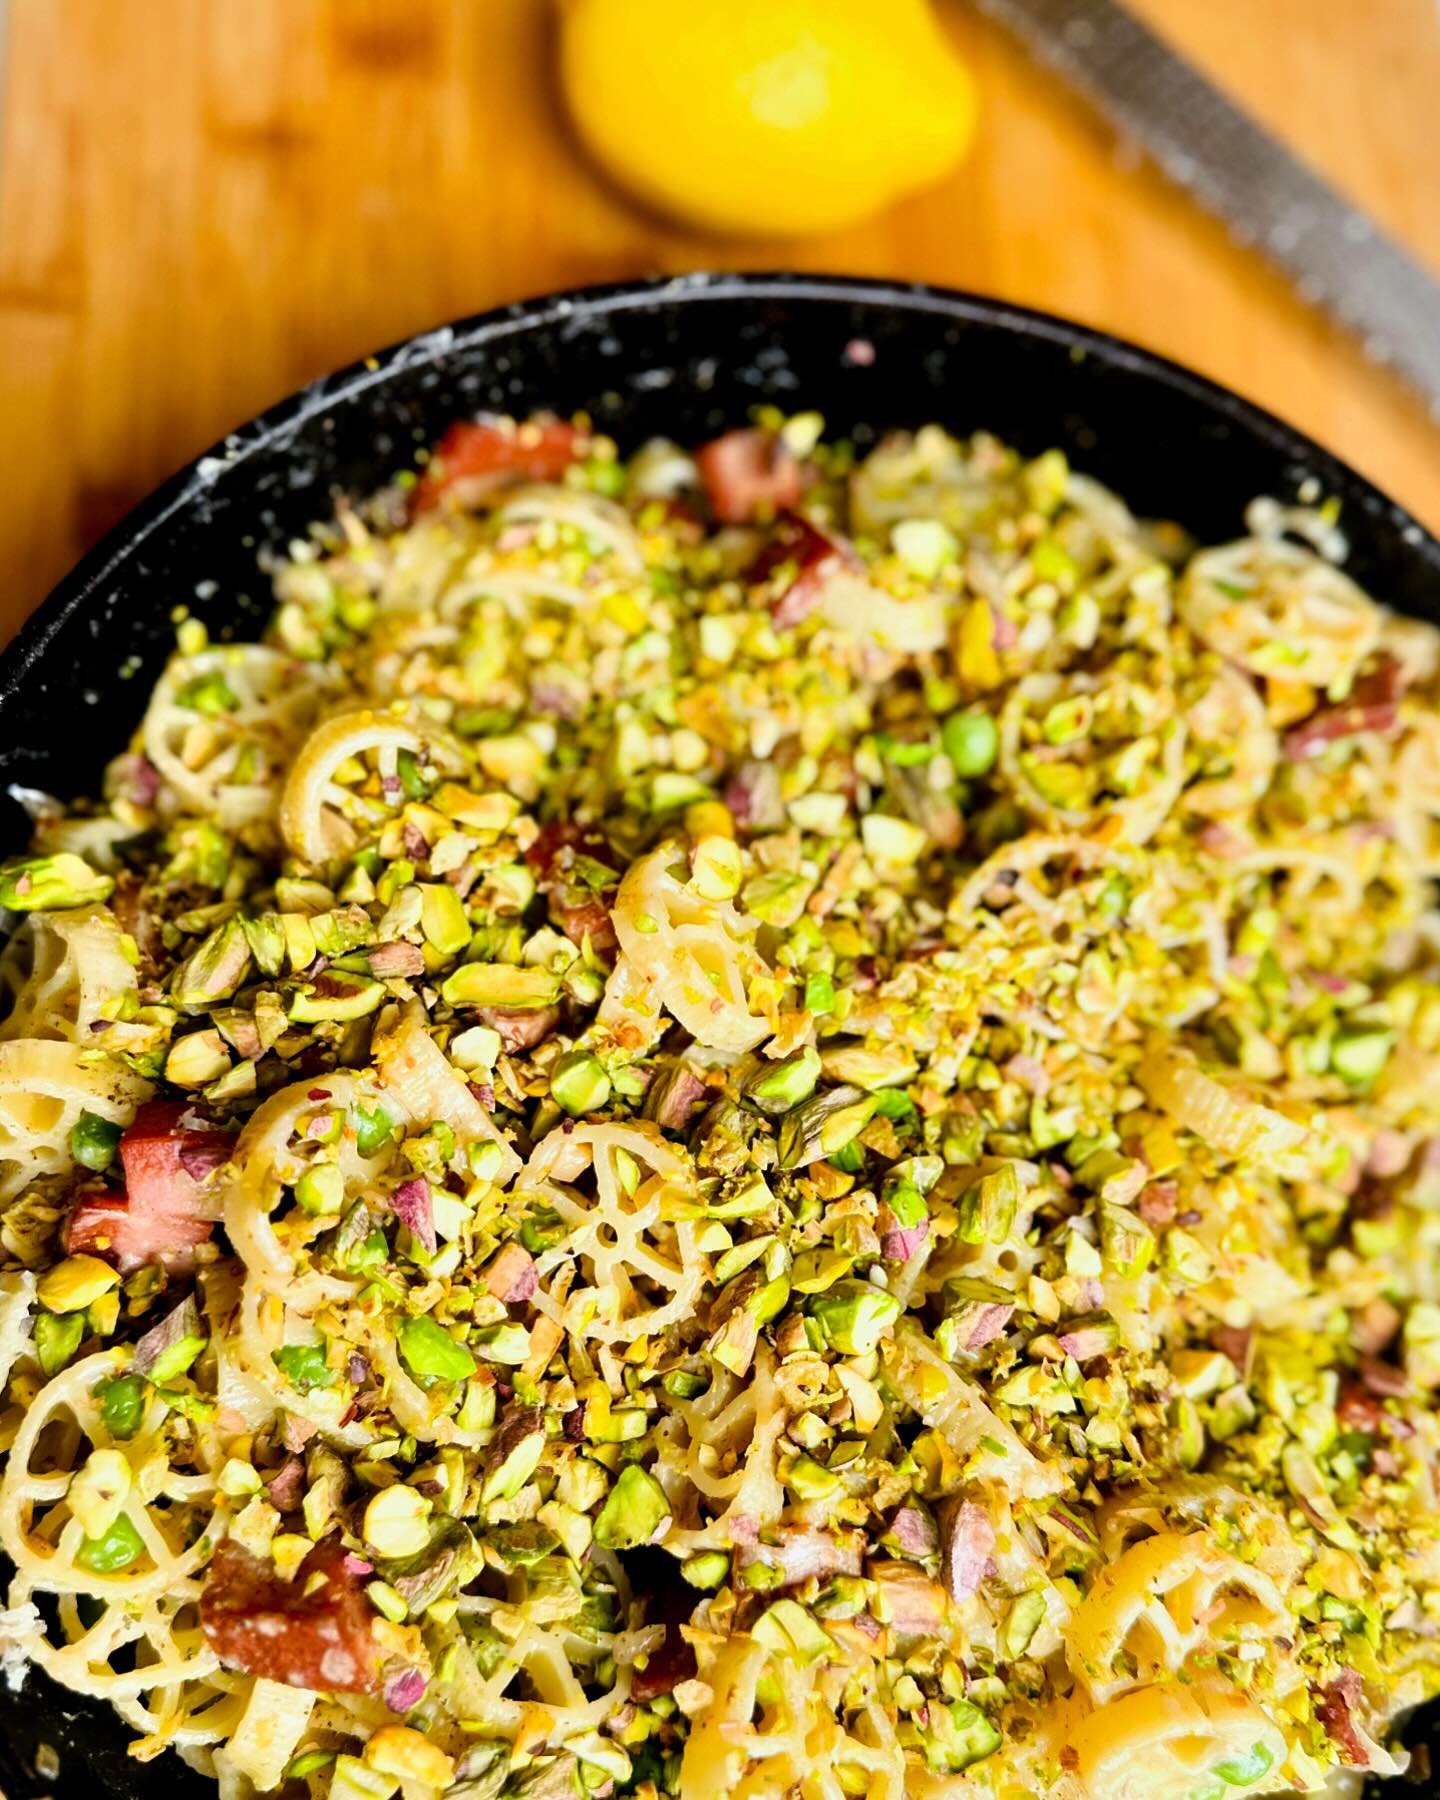 Spring Pea &amp; Mortadella Pasta 🌱🍋

This spring pasta salad embodies all that is wonderful about spring: bright lemon flavours, beautiful colours and a perfect balance of savoury and tangy in every bite! 

Save this recipe tonserve up for any occ